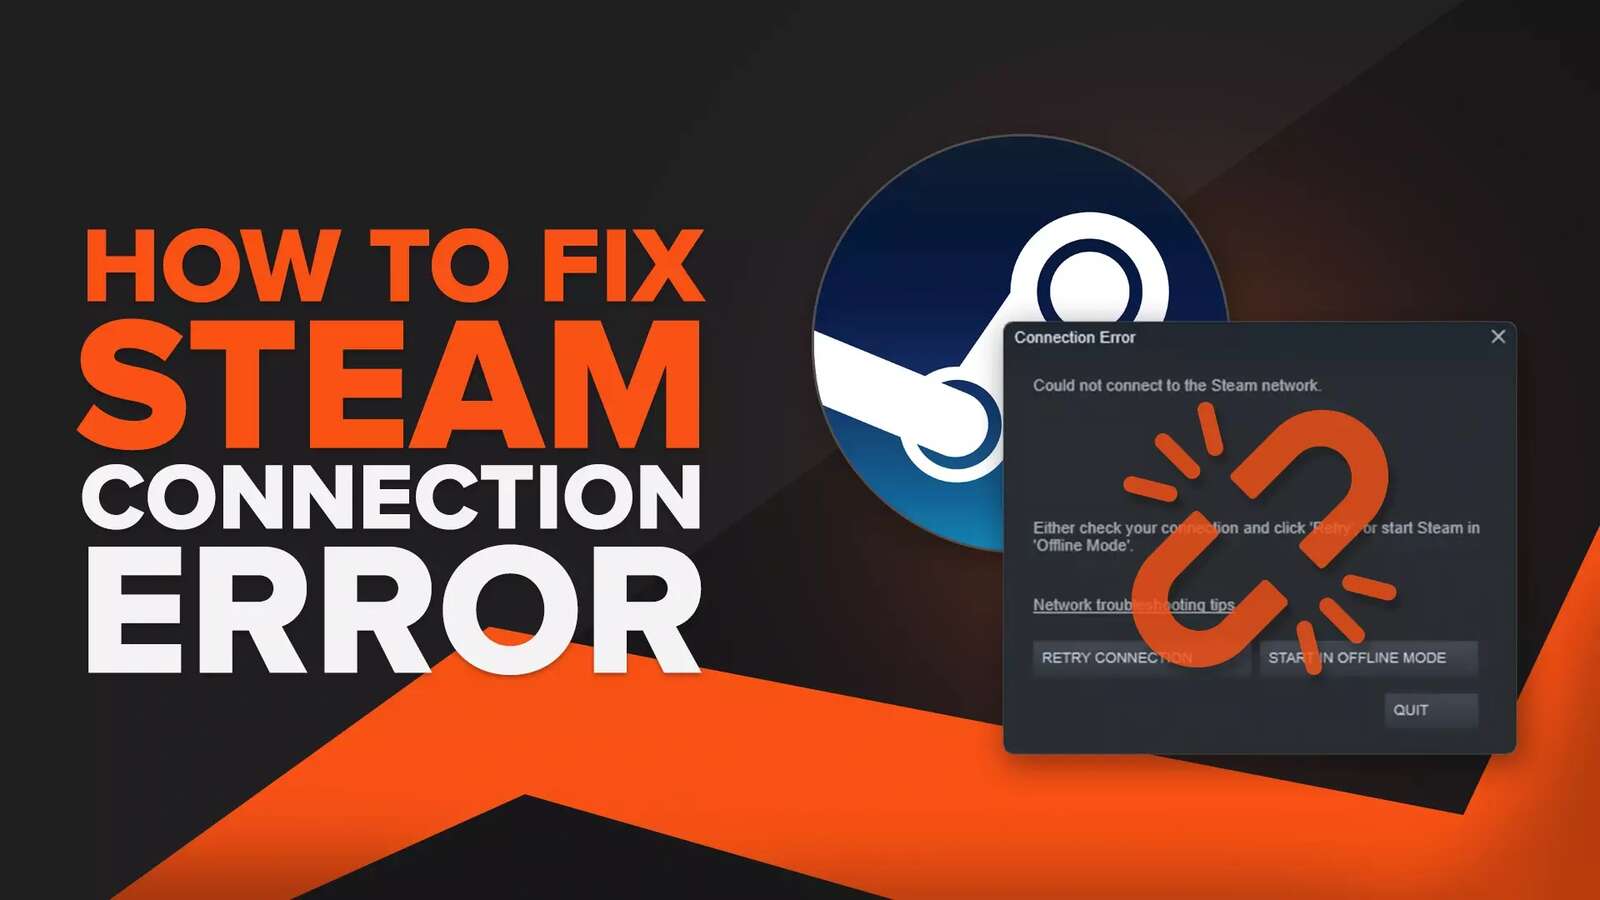 How To Easily Fix Steam Error "Could Not Connect to Network"